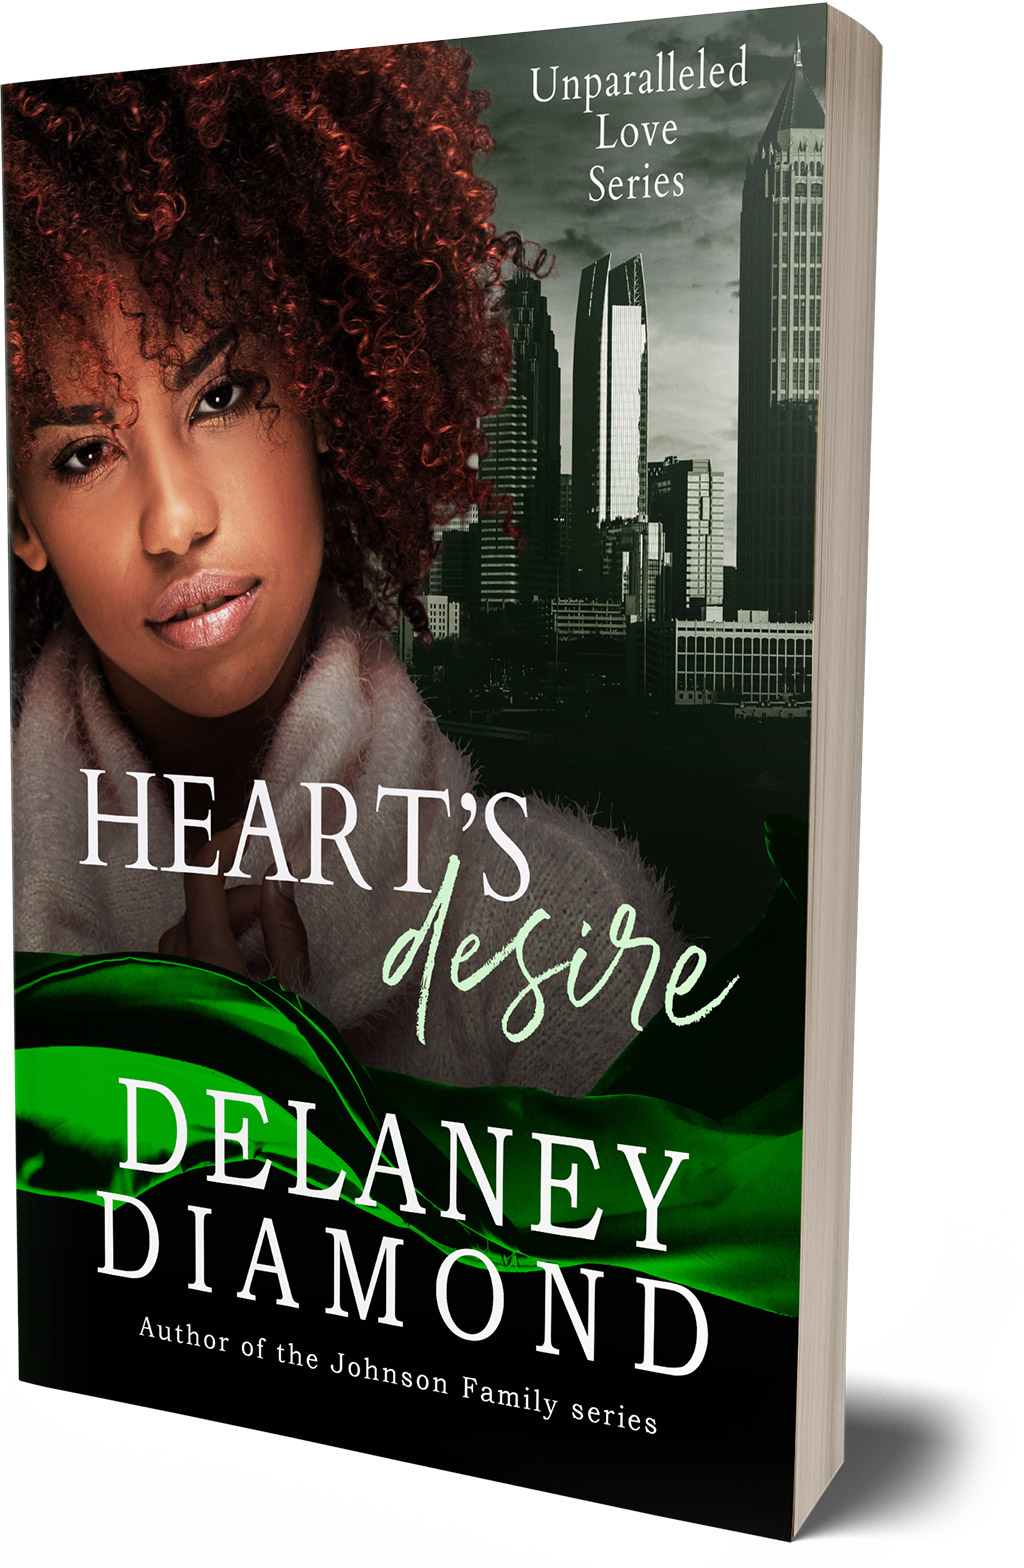 Heart's Desire (Unparalleled Love Series), a novel by Delaney Diamond